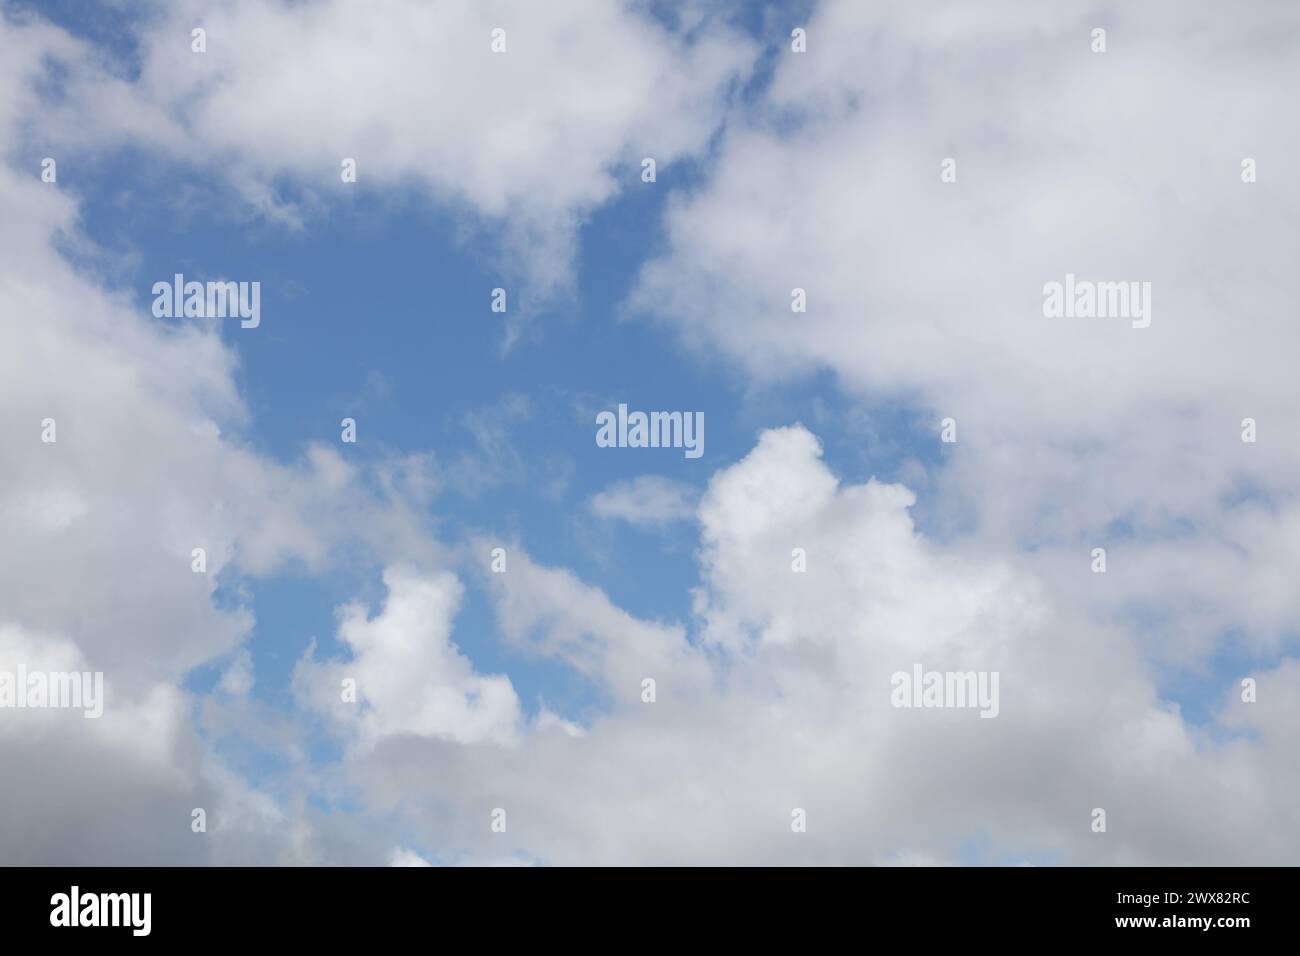 Fluffy white clouds in a blue sky Stock Photo